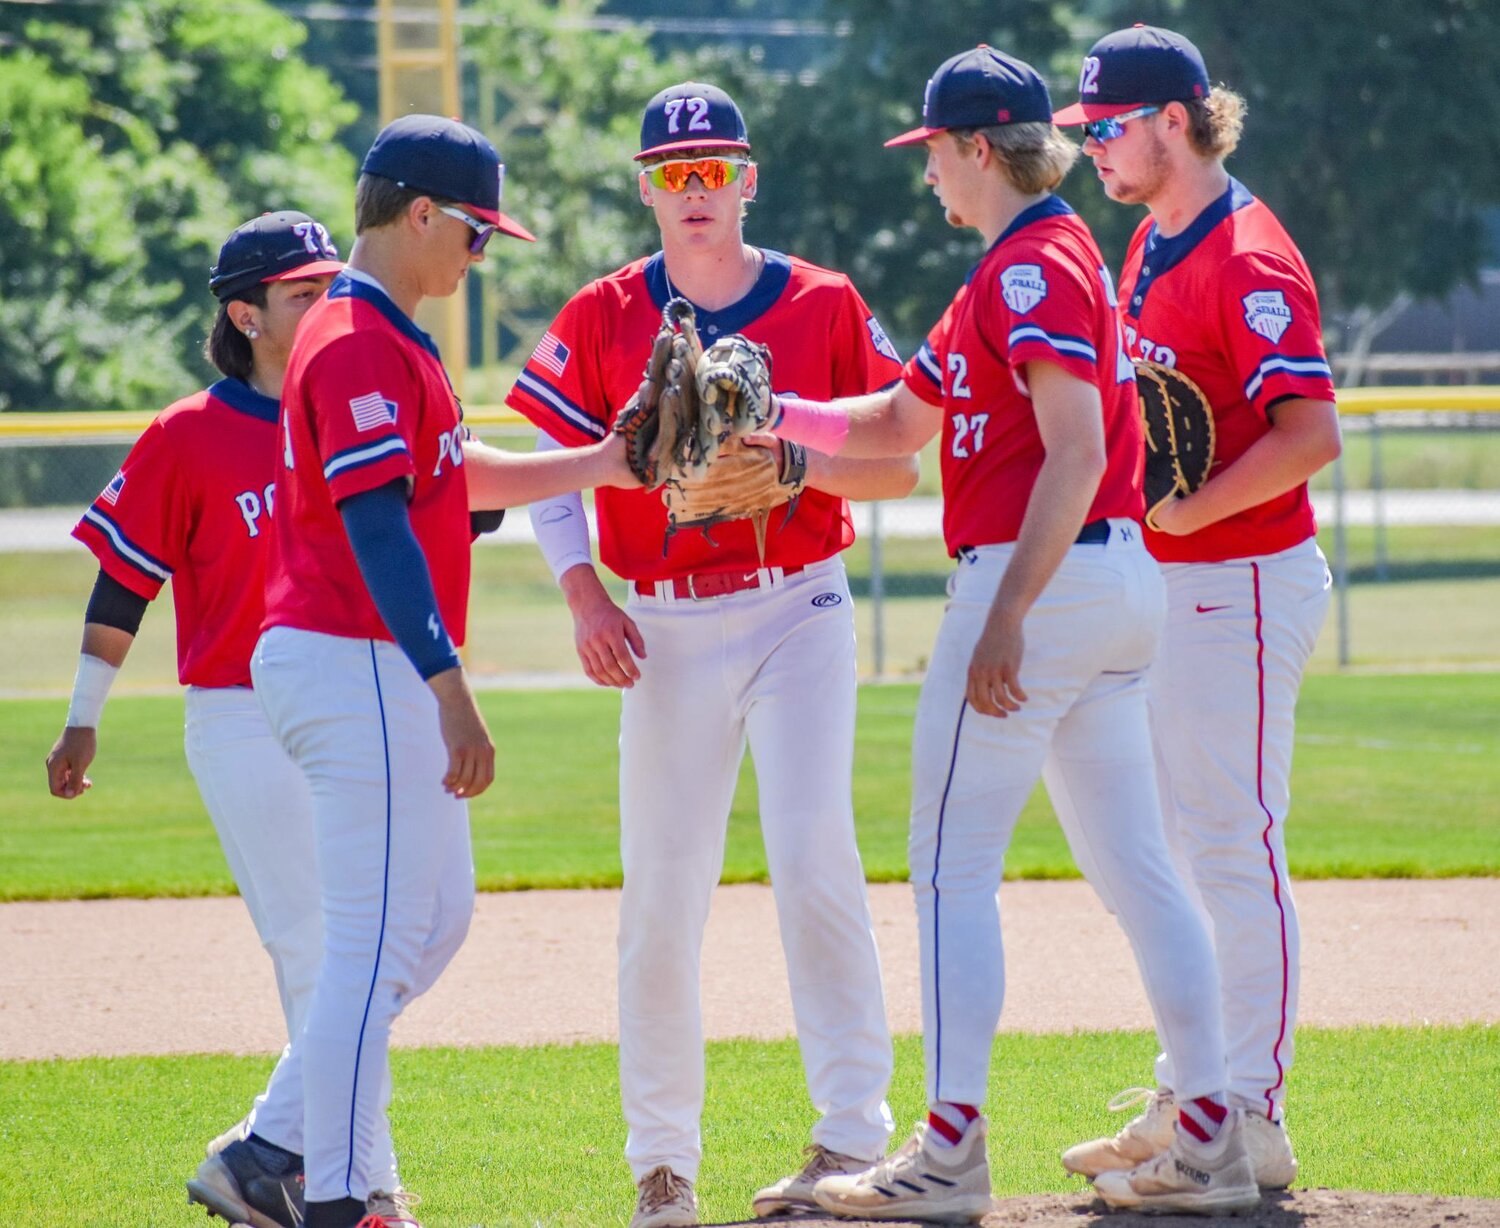 Journal Review File Photo
Crawfordsville Post 72 ends the regular season with an 18-9 record and finished their 15-team tournament as the runner-up this past weekend. Post 72 plays in the Frankfort Regional on Friday against Muncie Post 19 at 5 p.m.